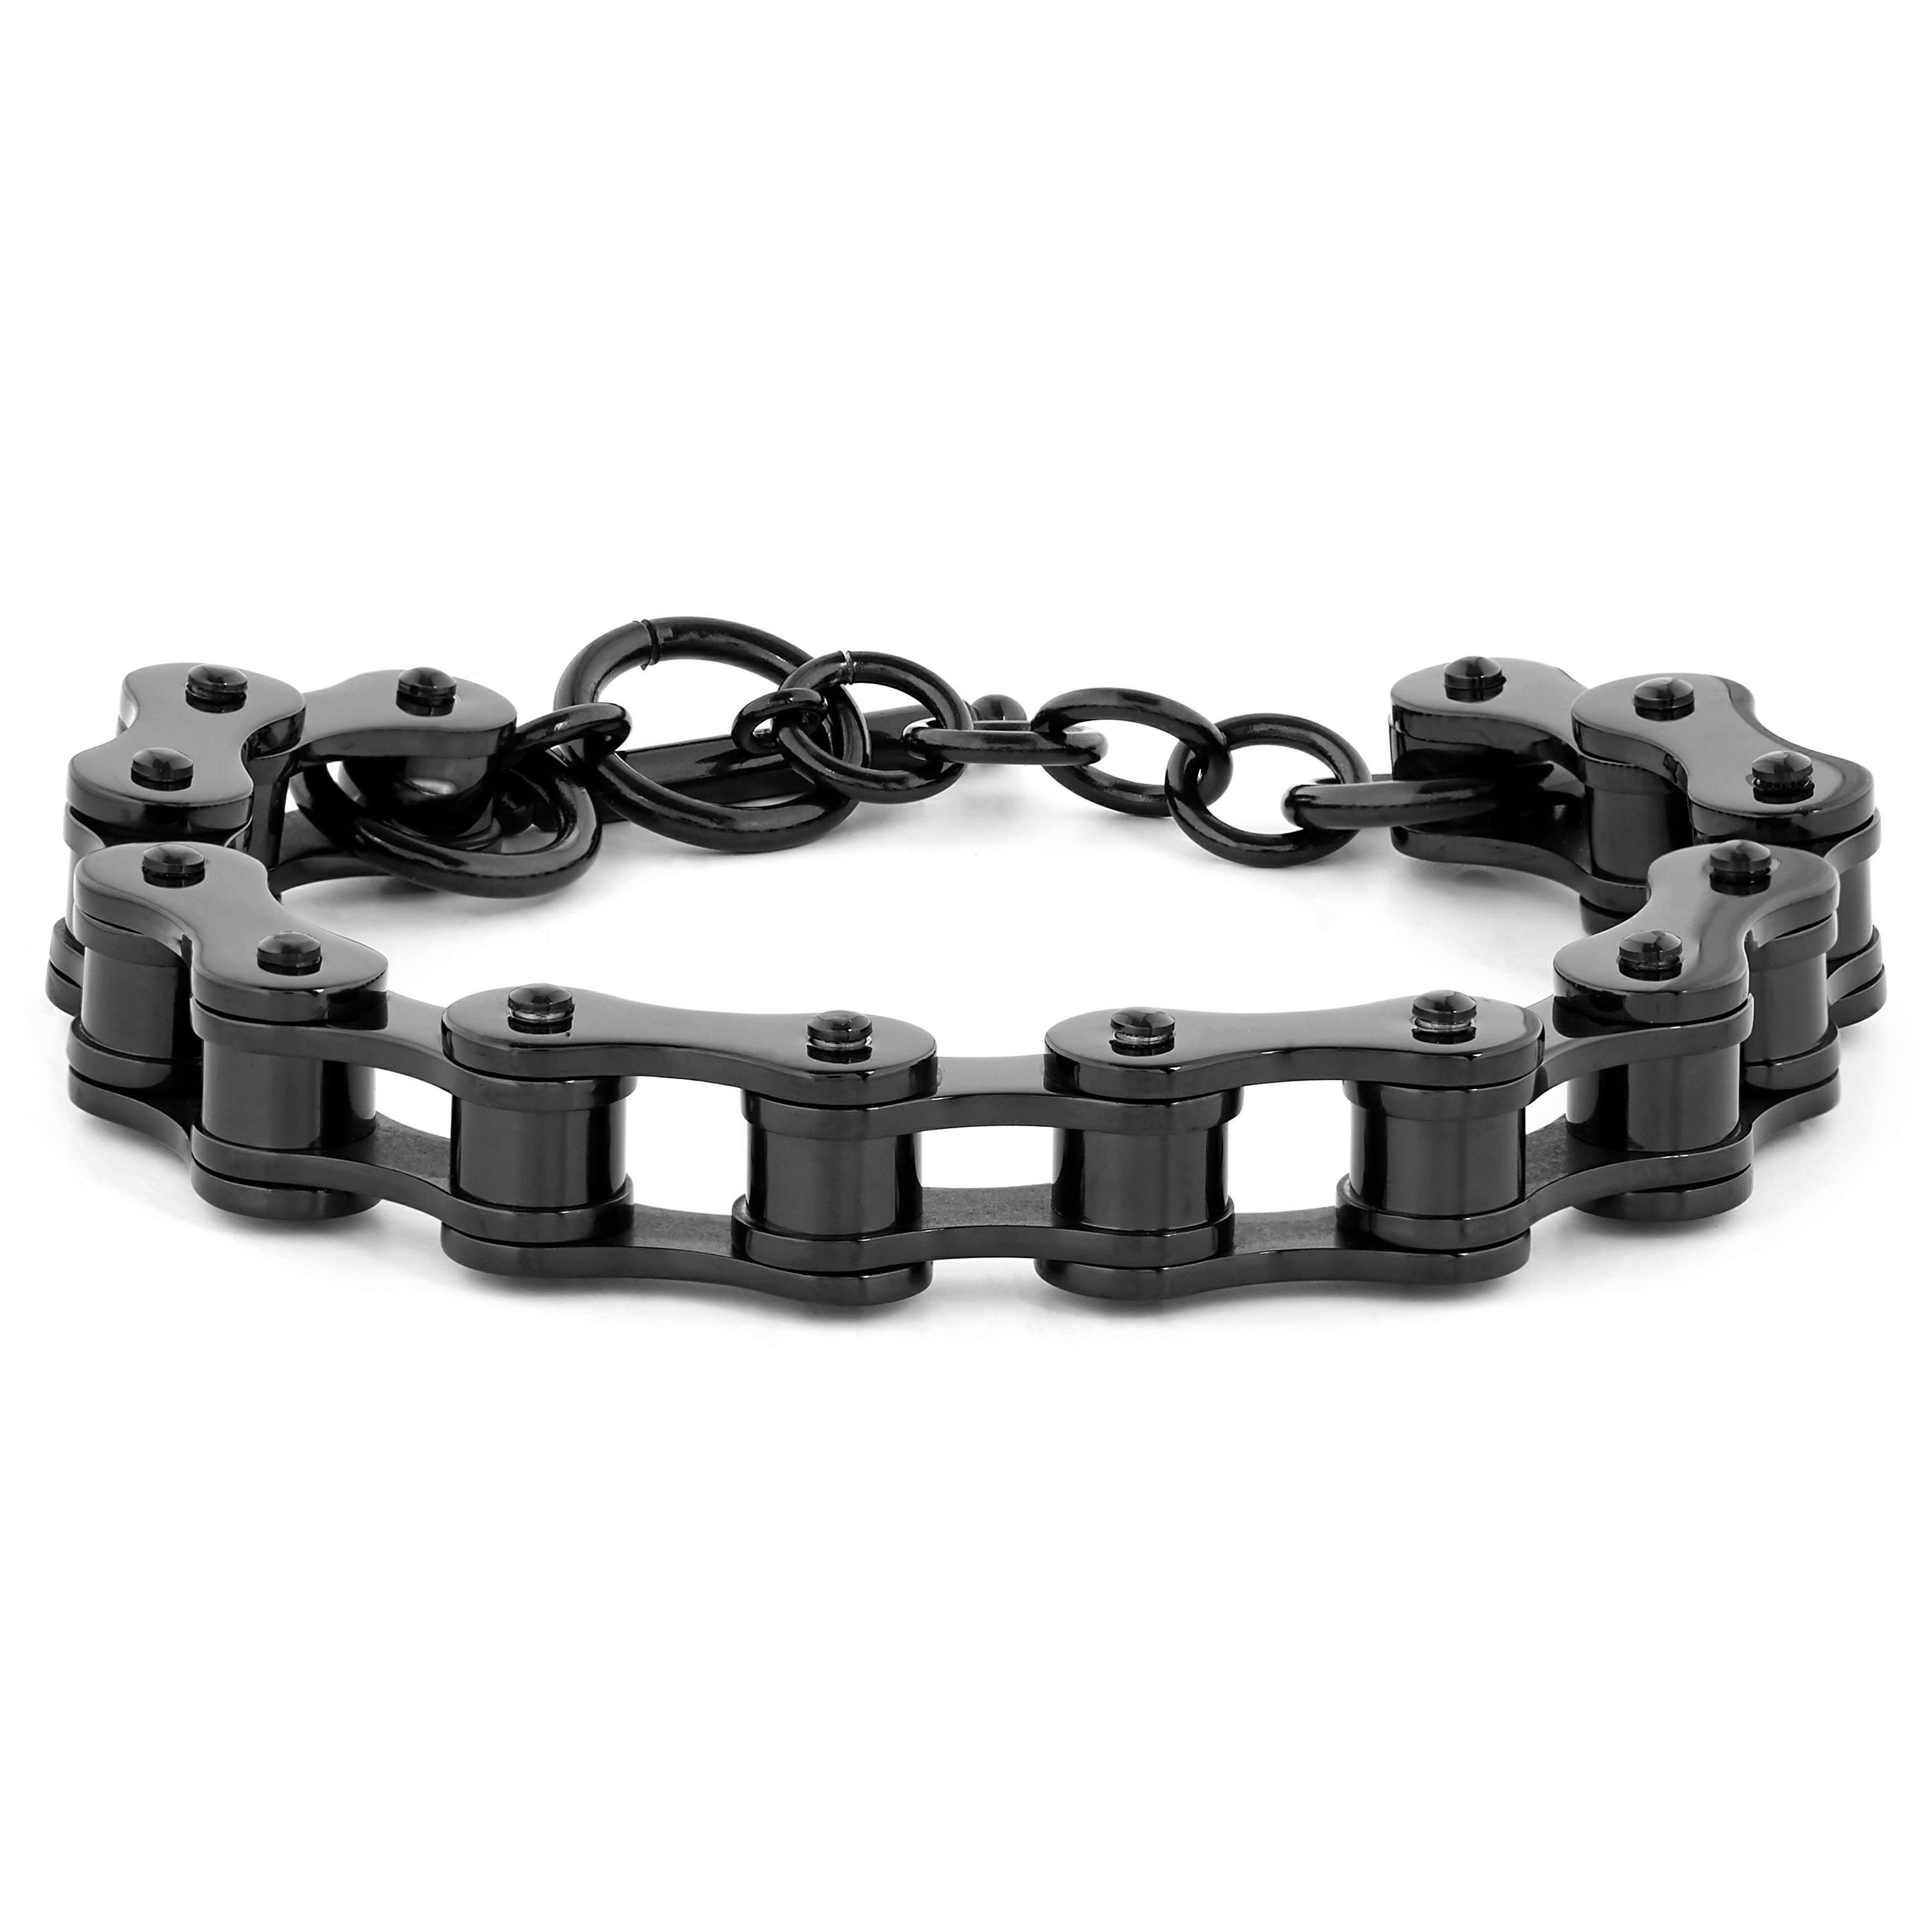 Stainless Steel Bike Chain Bracelet For Men And Women Black, Green, Orange,  Silver, And Blue Heavy Duty Punk Mens Jewelry For Bikers, Motorcycles,  Biking, Or More From Efwmz, $31.61 | DHgate.Com